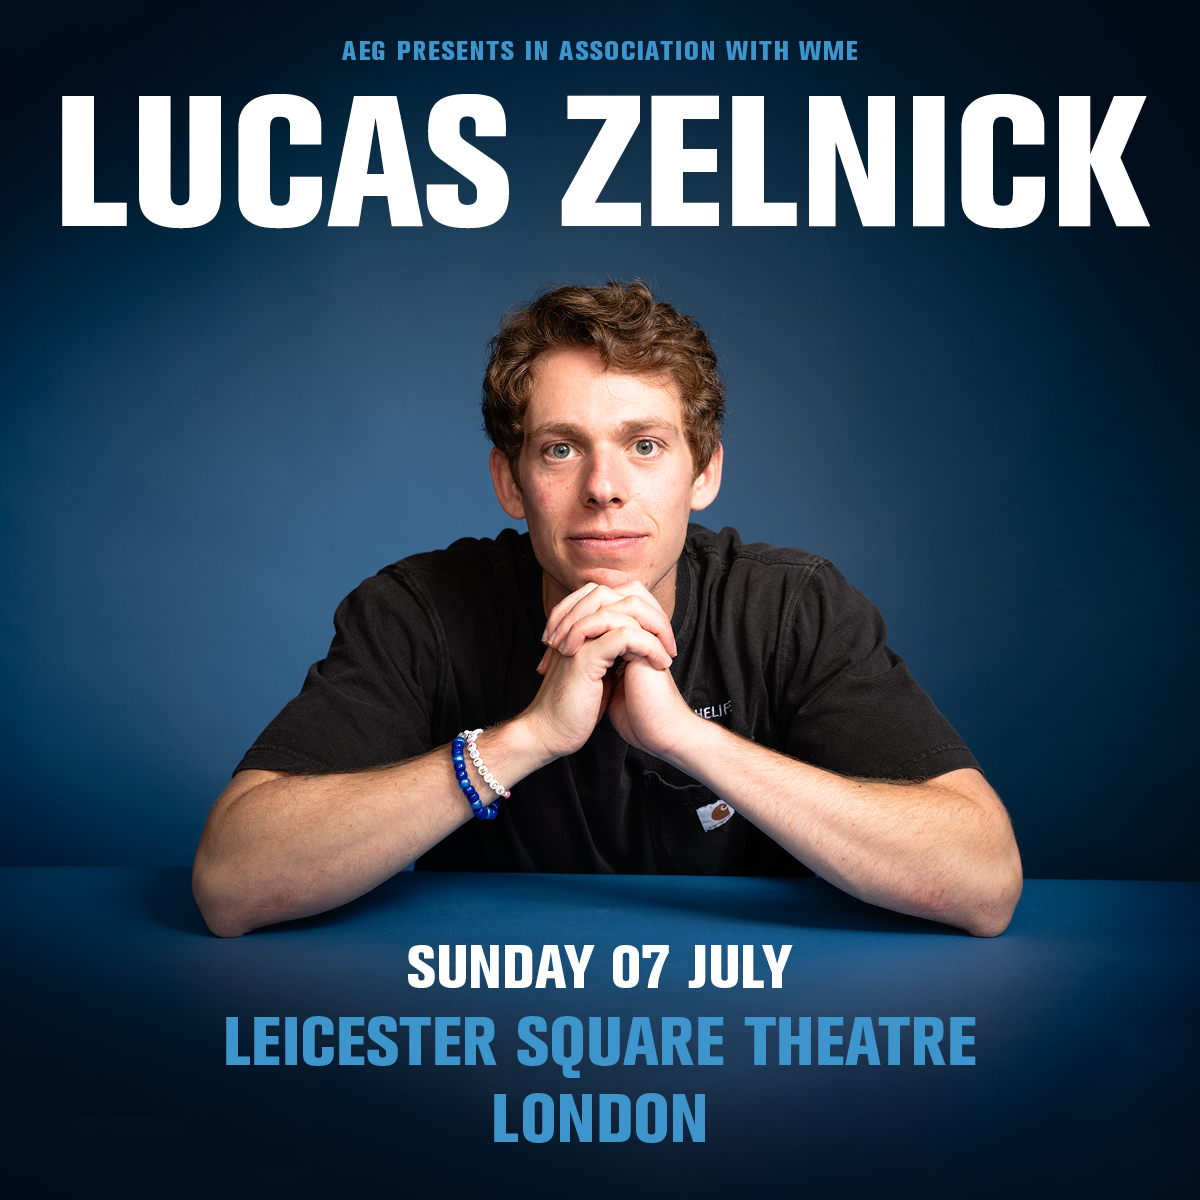 #AXSONSALE 🎤 Lucas Zelnick at @lsqtheatre on Sunday 7th July! 

Lucas Zelnick is a stand-up comedian born, raised and based in New York City who challenges his cushy upbringing through punch-heavy material!

⏰ Tickets are on sale at 10am
🎫 w.axs.com/3zSQ50RkU3R